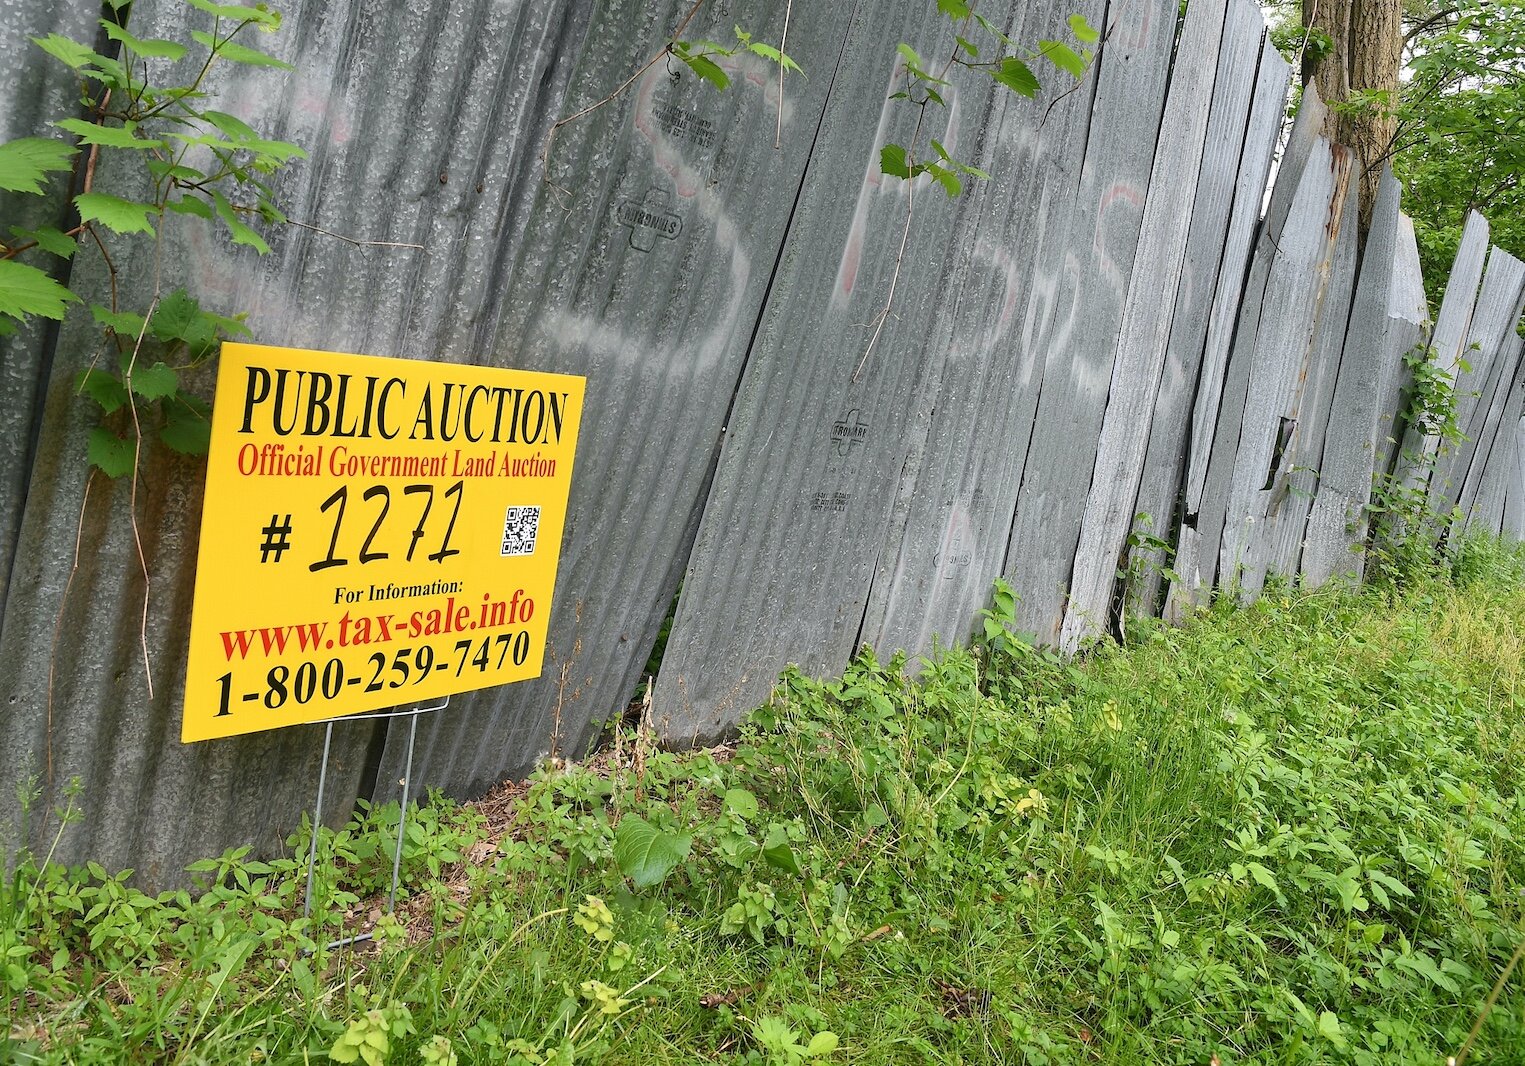 Public auction sign on a fence in front of property located on West Hamblin Avenue, just west of Butler Street, in Battle Creek